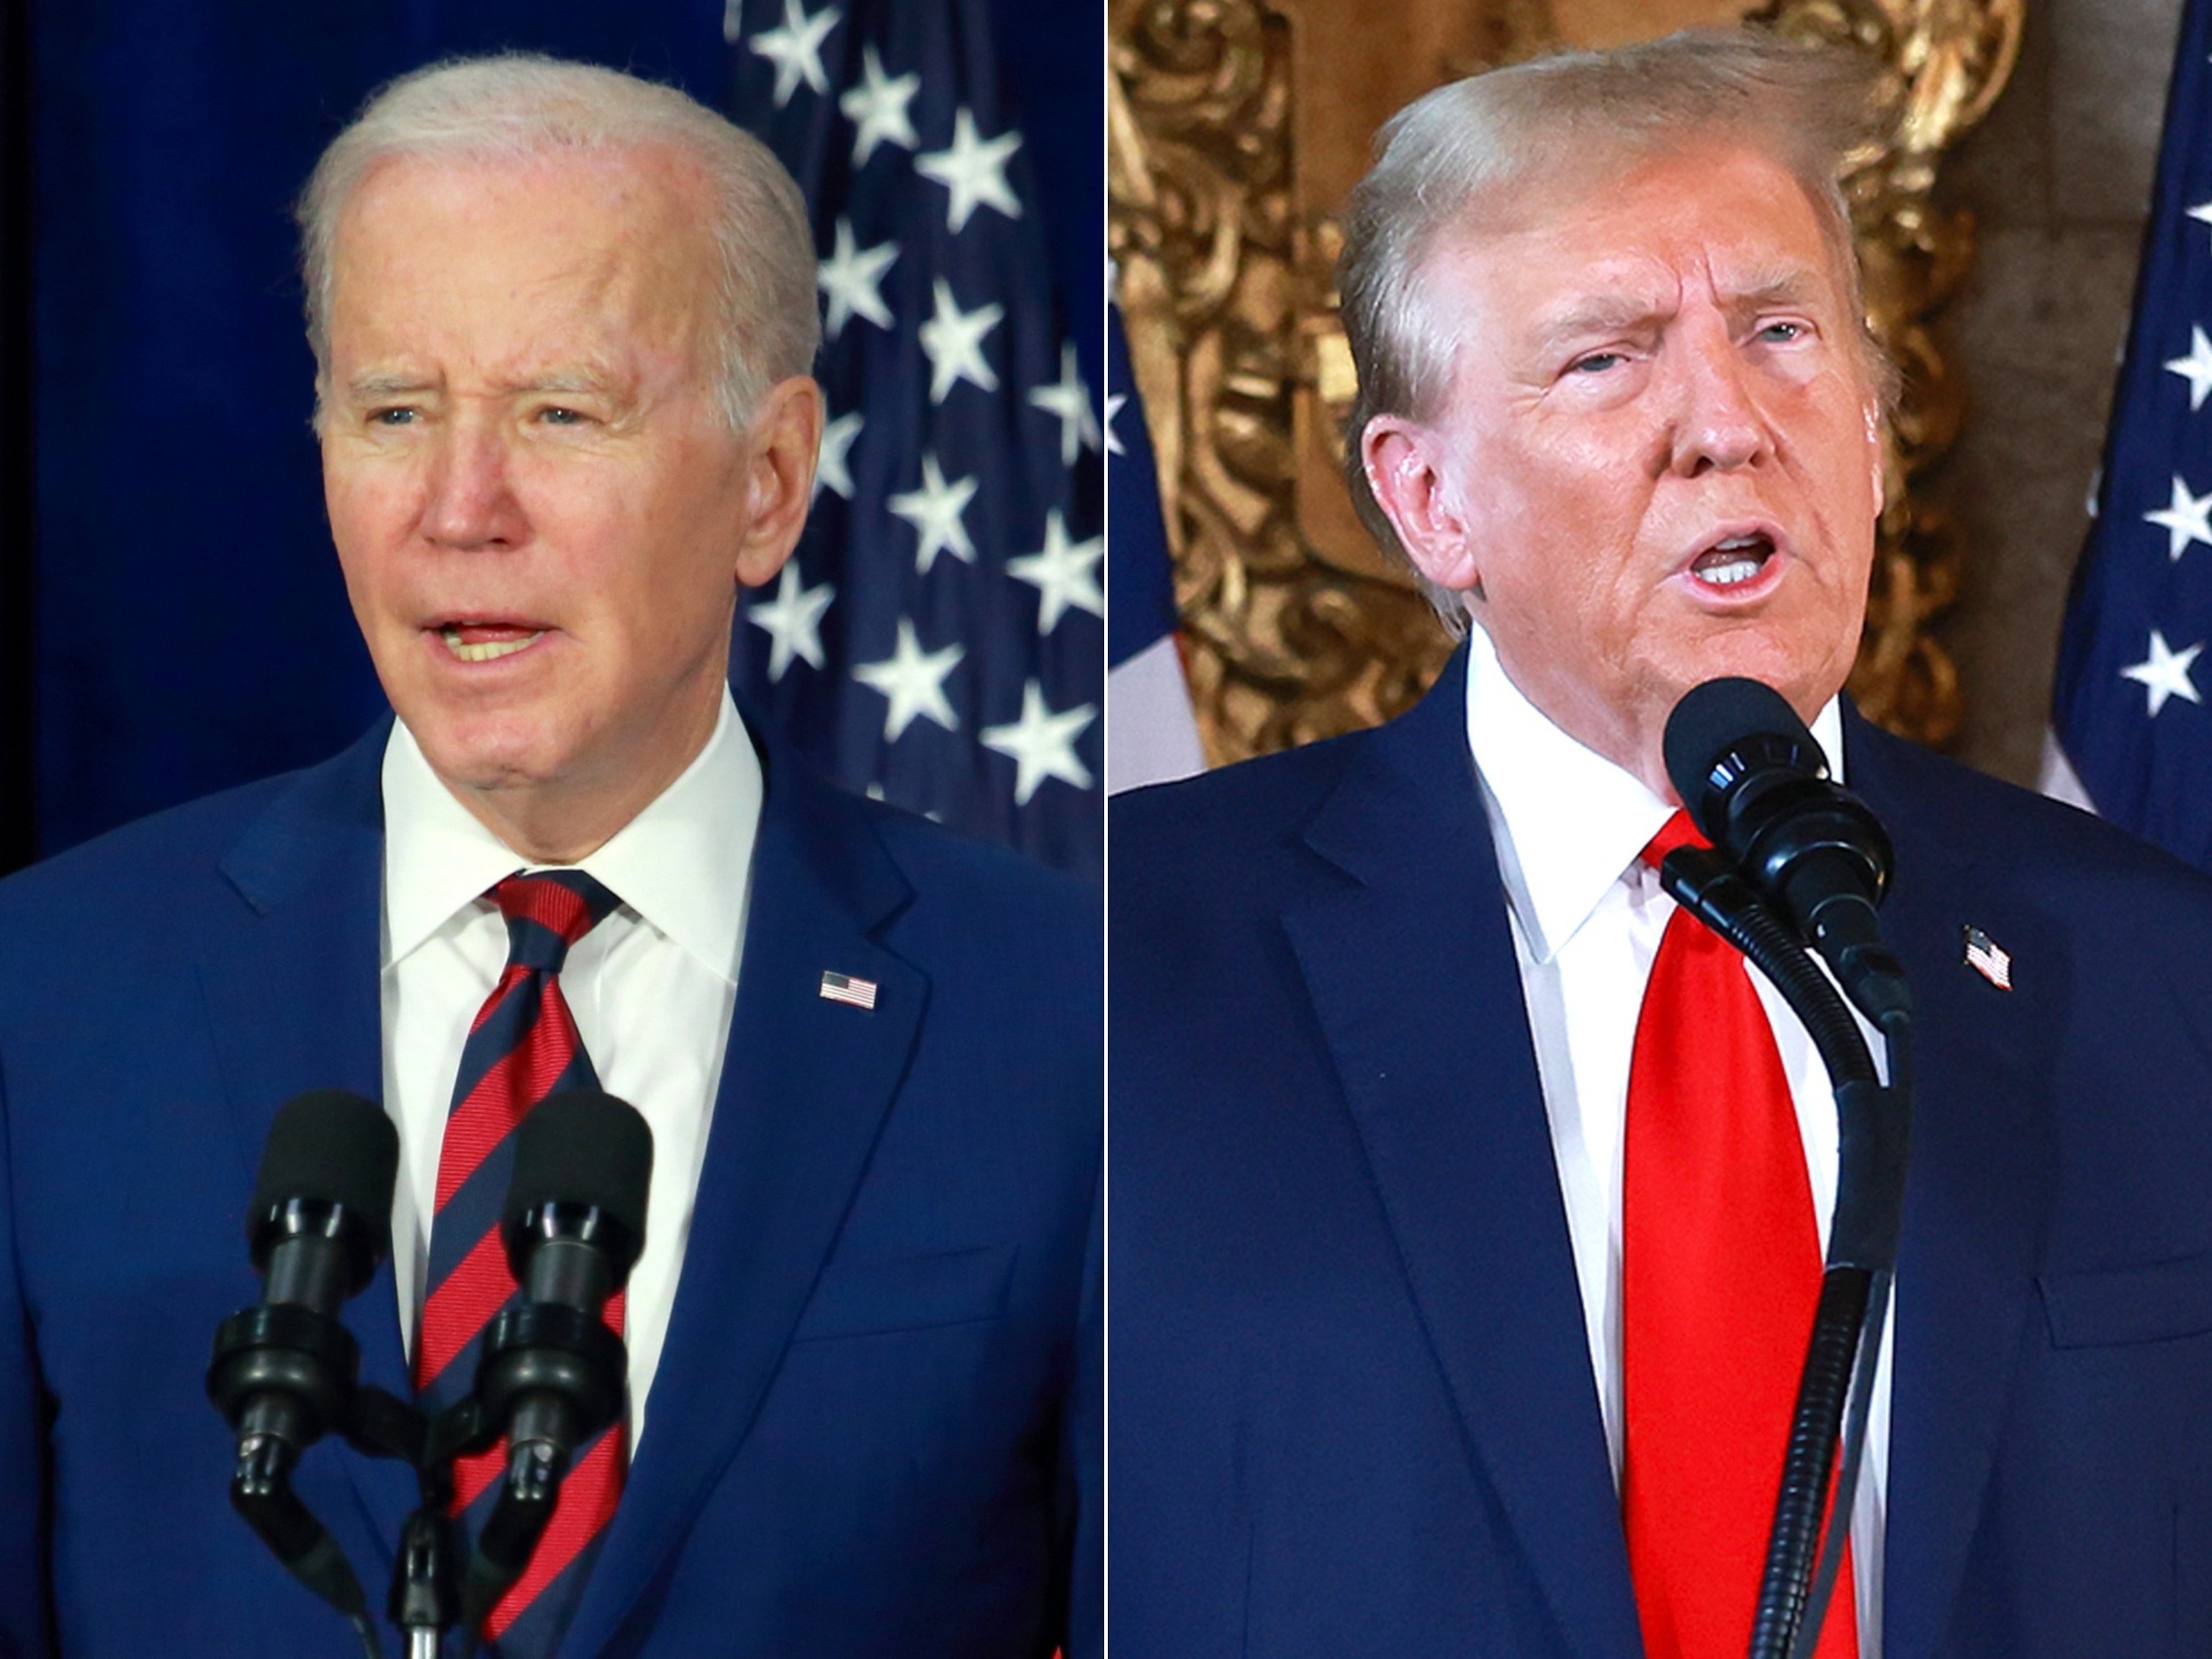 PHOTO: President Joe Biden delivers remarks on reducing gun violence, on March 14, 2023, in Monterey Park, Calif. | Republican presidential candidate Donald Trump holds a press conference at the Mar-a-Lago estate, on April 12, 2024, in Palm Beach, Fla.